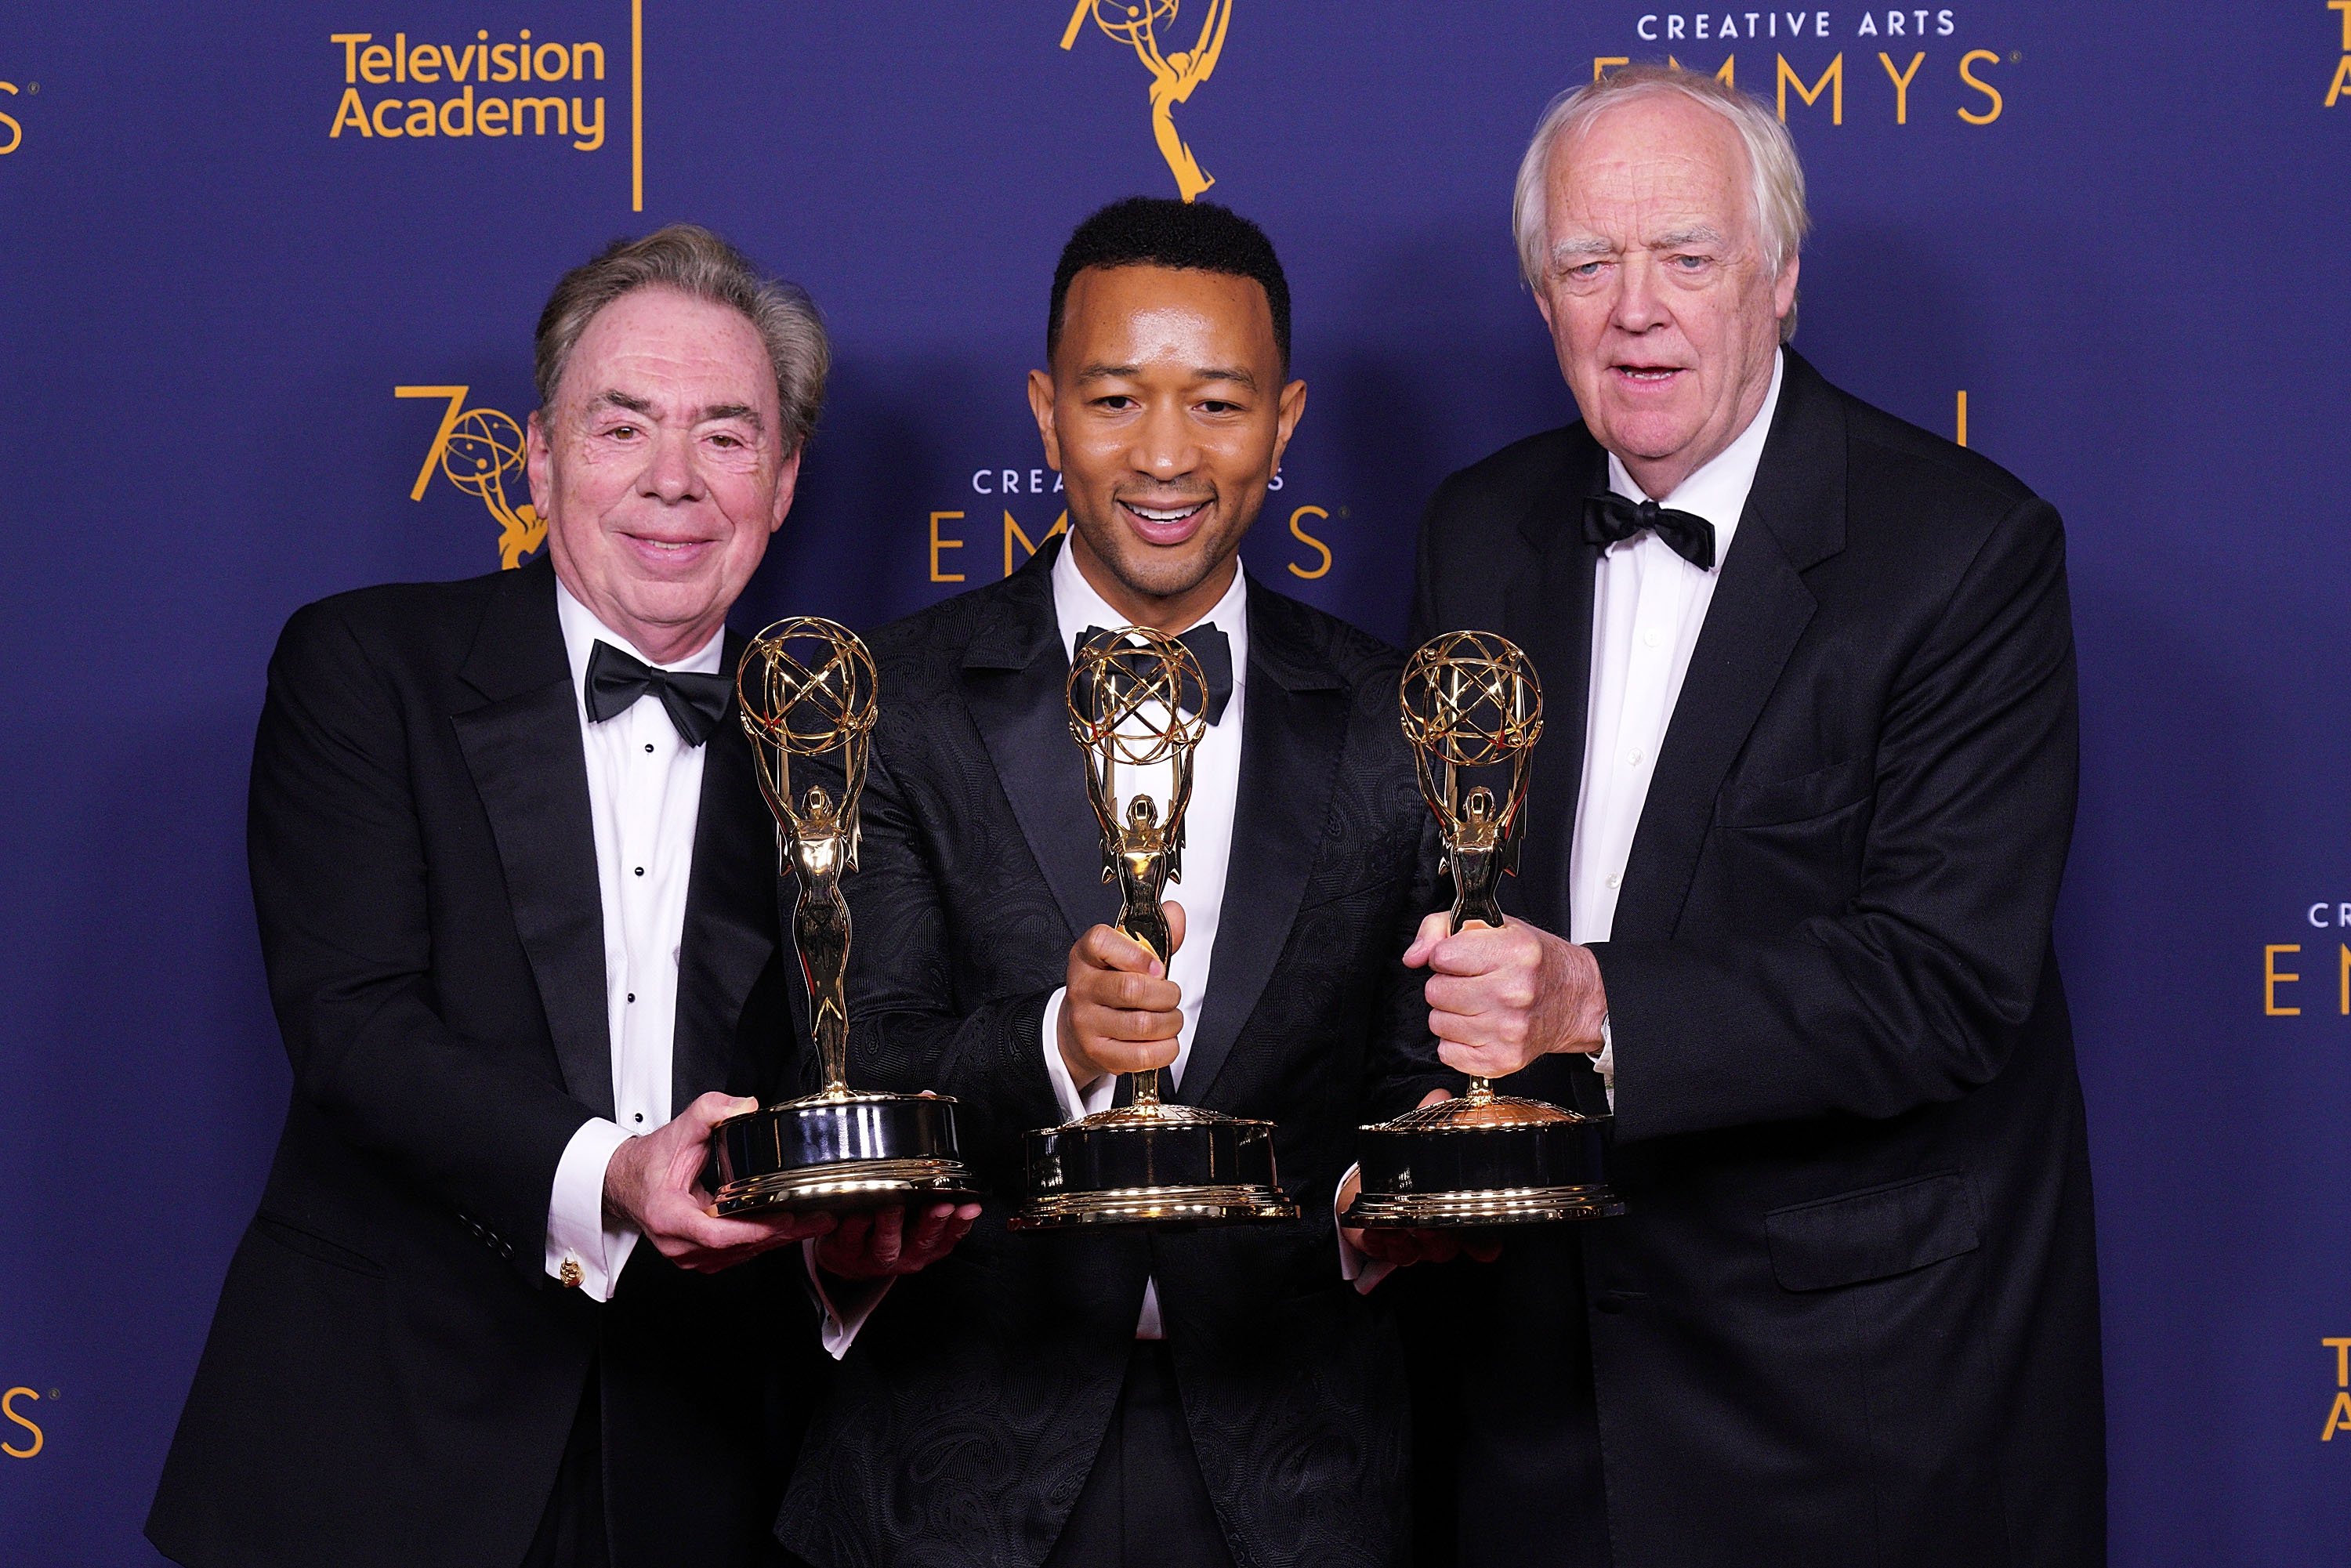 Andrew Lloyd Webber, John Legend, and Tim Rice win their Emmys in 2018